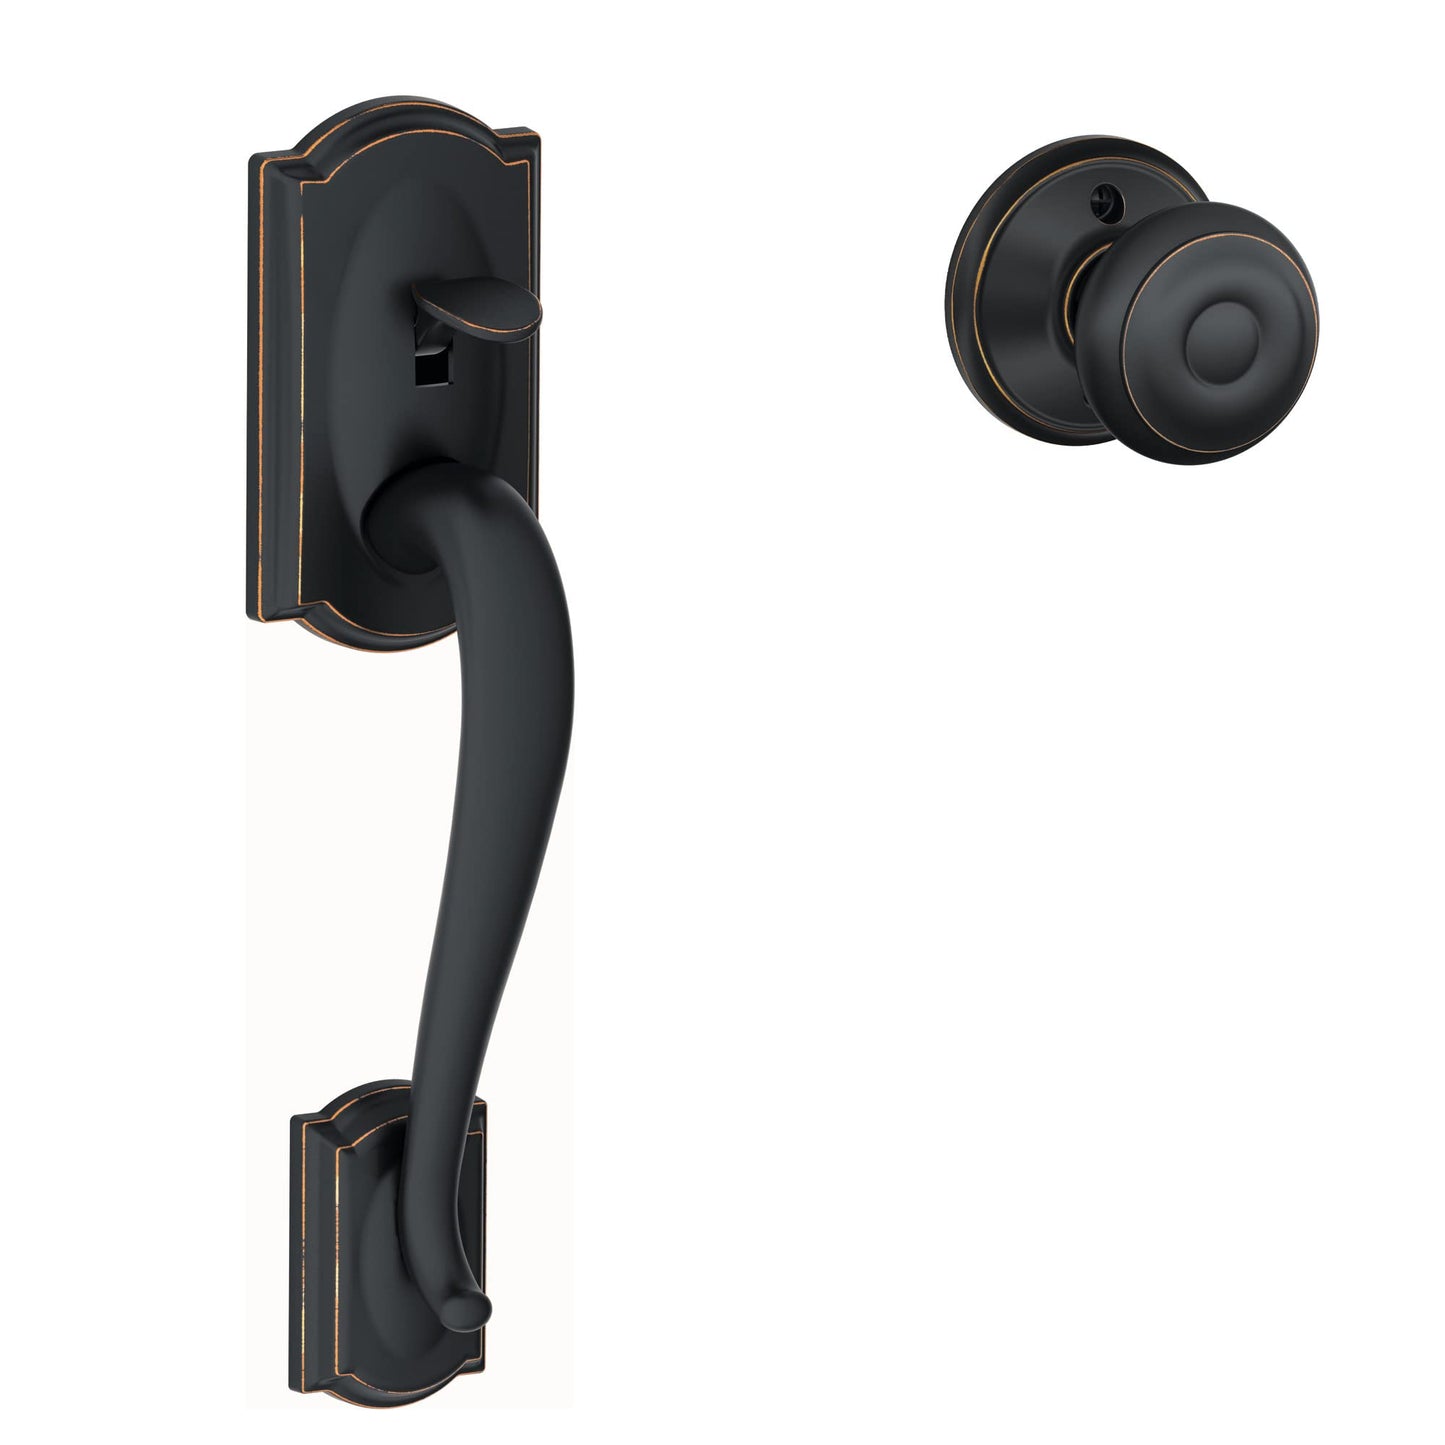 Schlage FE285 CAM 505 ACC 605 LH Camelot Front Entry Handleset with Left-Handed Accent Lever Lower Half Grip, Standard Interior Trim, Bright Brass